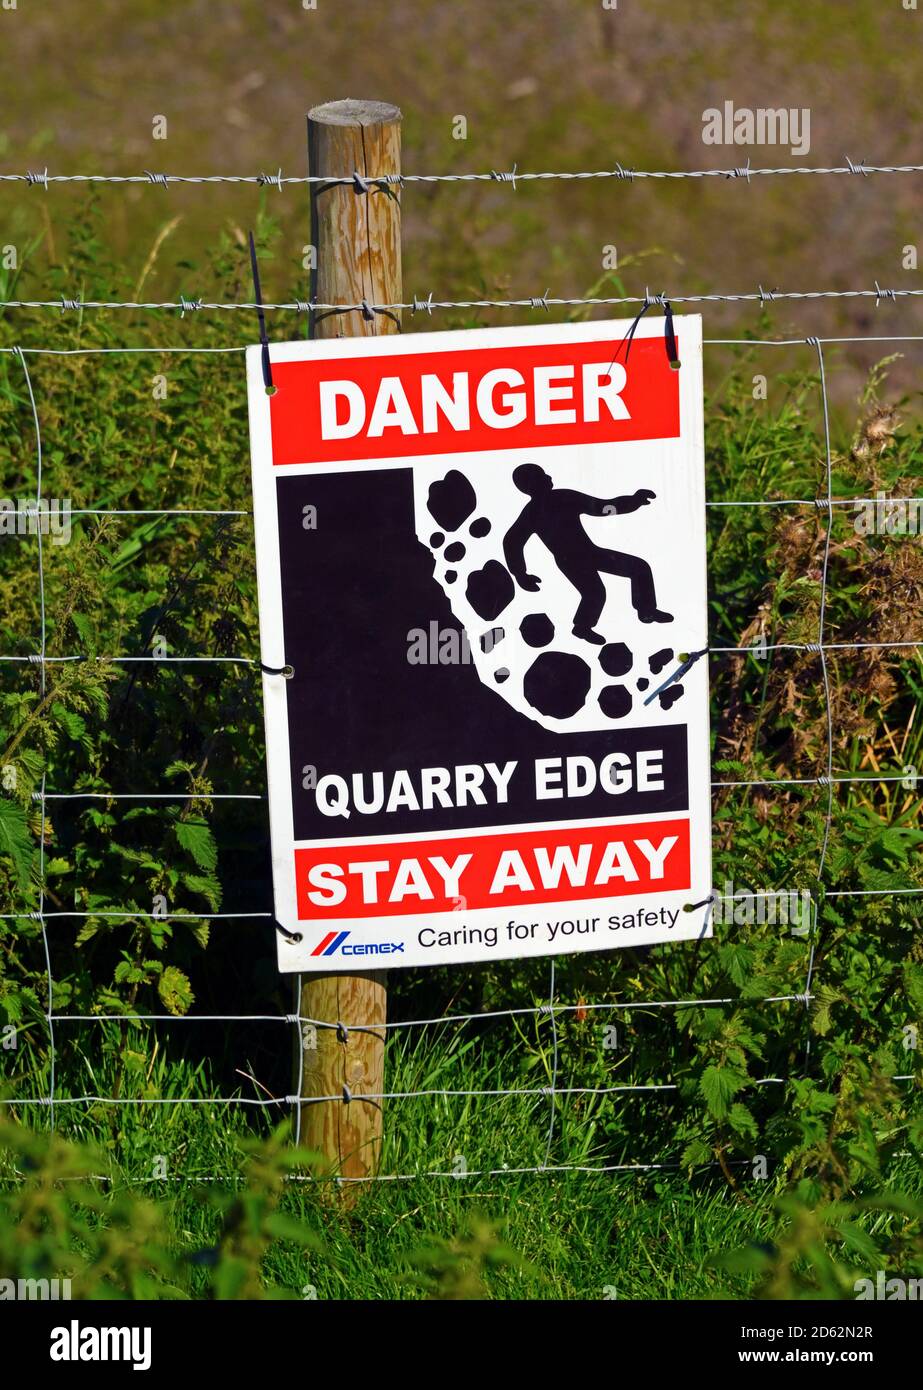 Warning sign. 'DANGER QUARRY EDGE STAY AWAY. CEMEX Caring for your safety'. Roan Edge Quarry, Cemex U.K., New Hutton, Kendal, Cumbria, England, U.K. Stock Photo